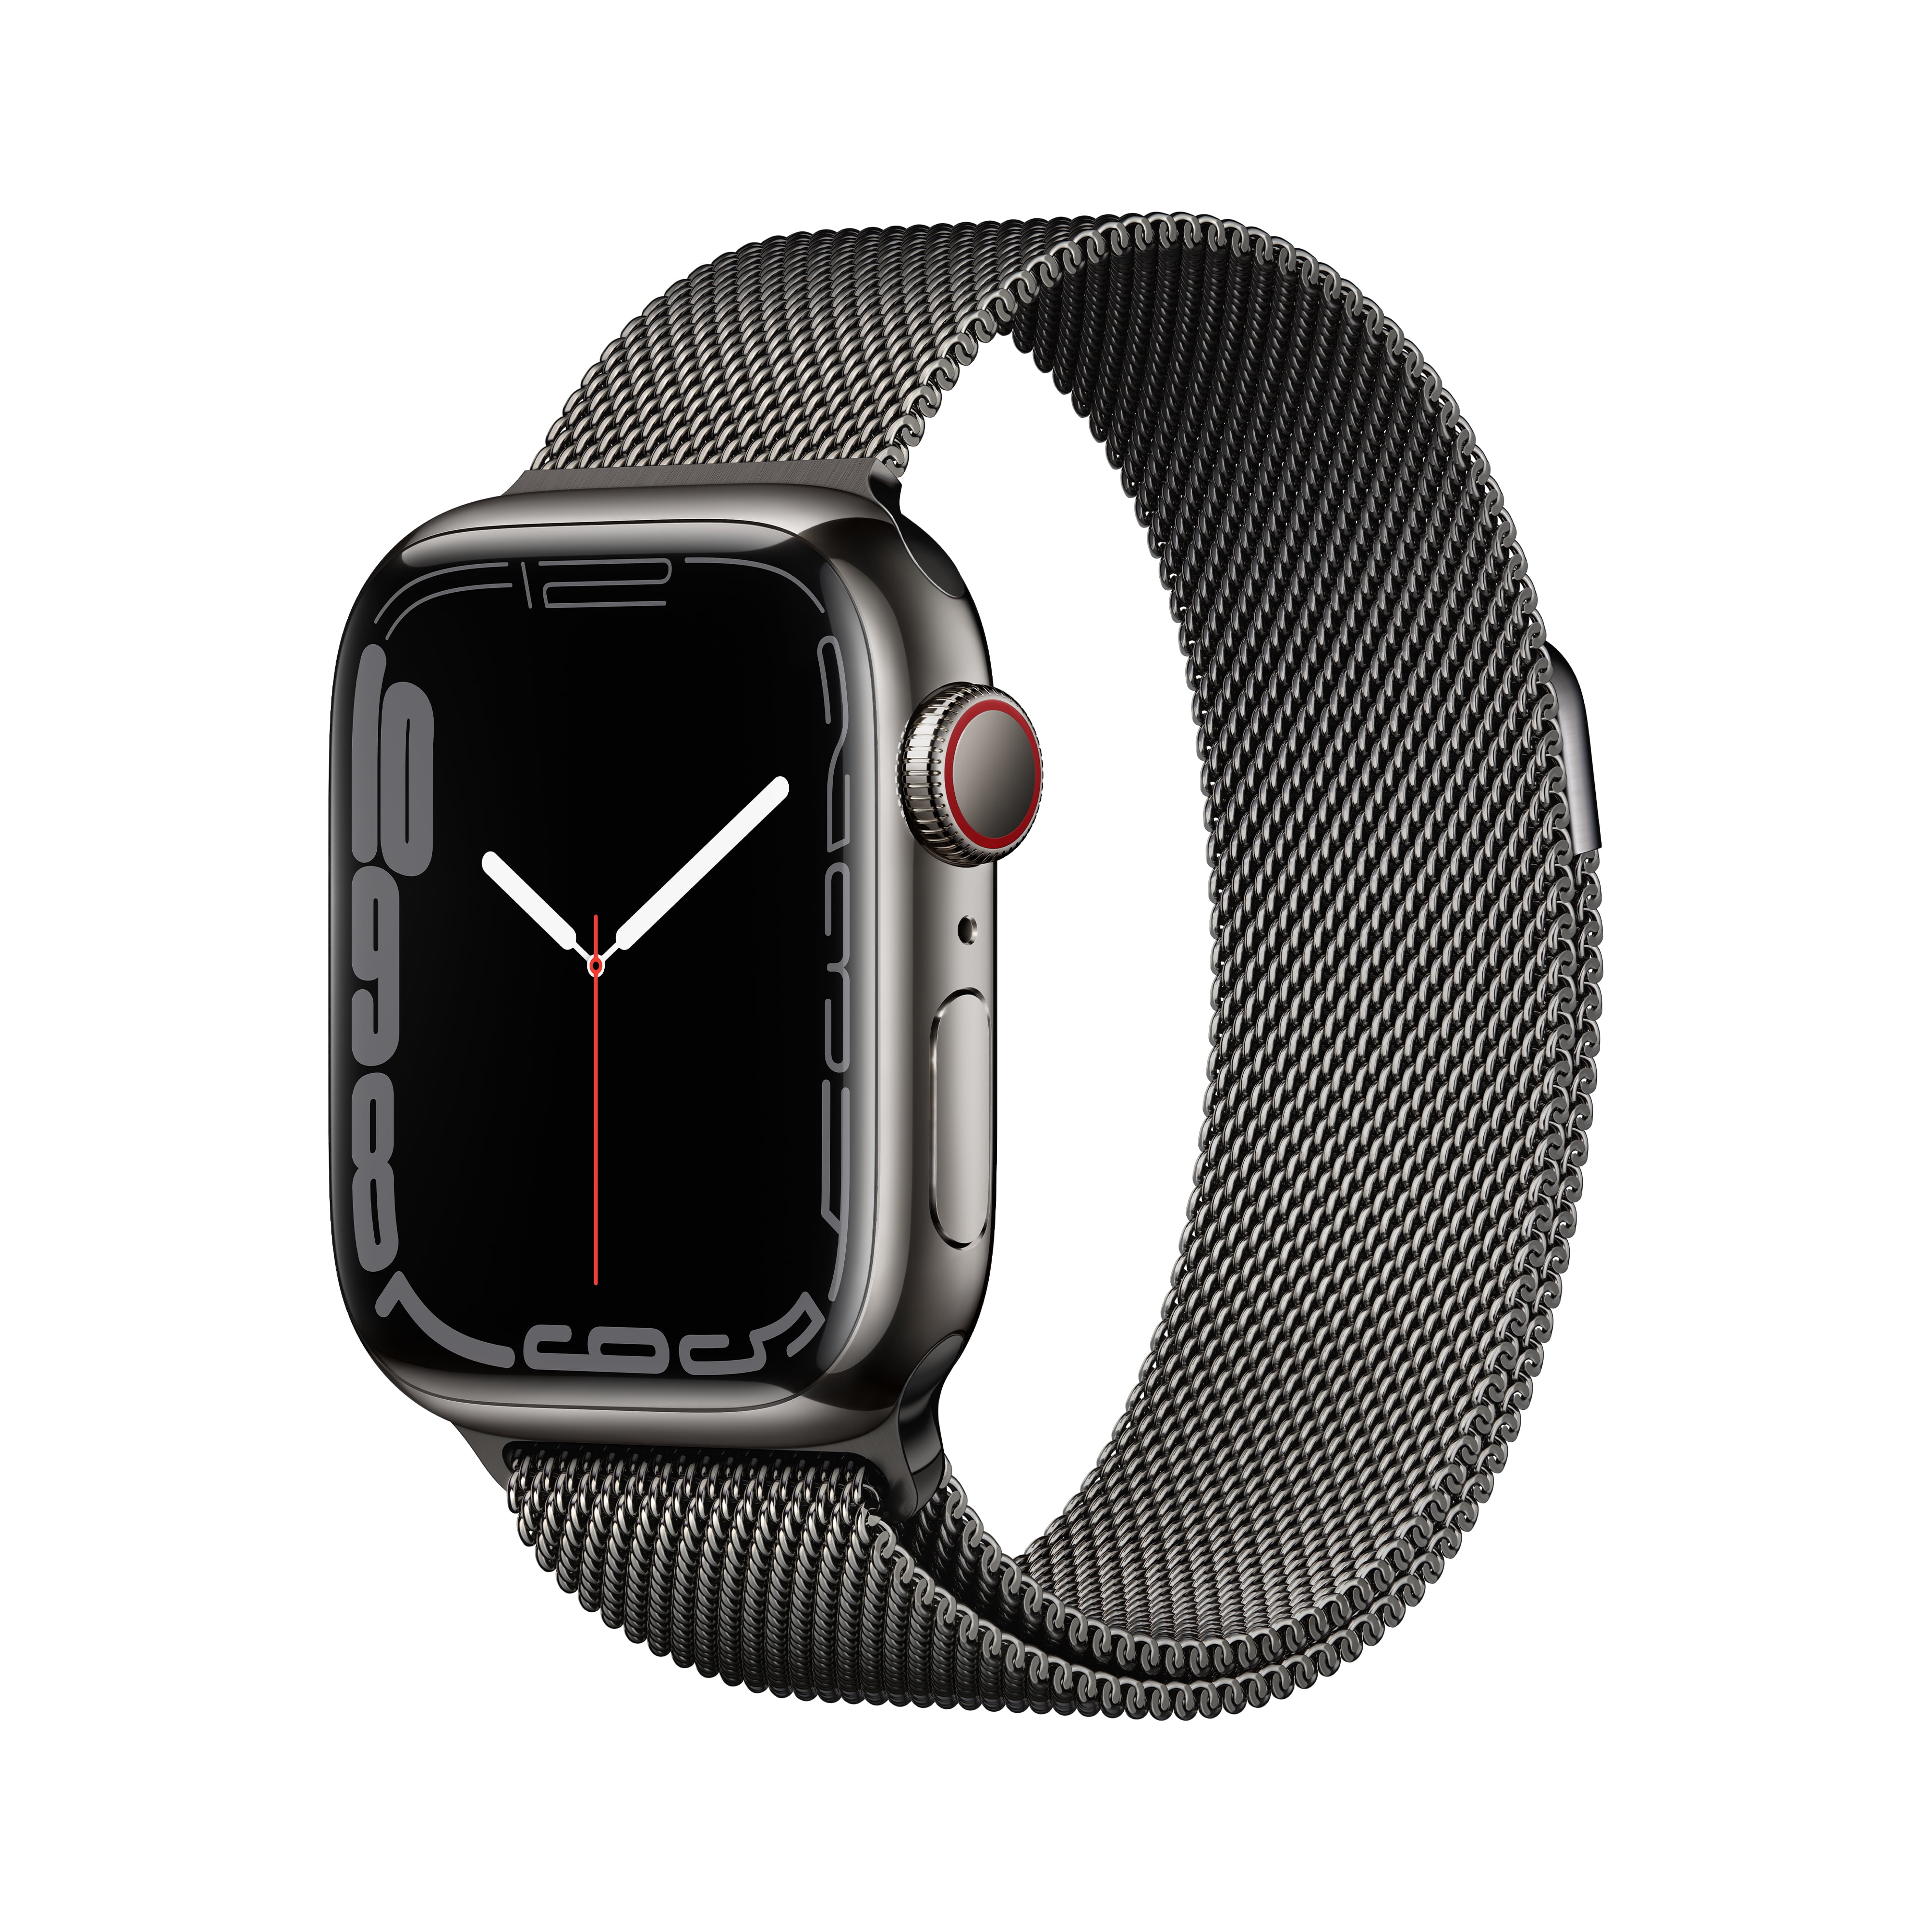 Apple Watch Series 7 GPS + Cellular, 41mm Graphite Stainless Steel